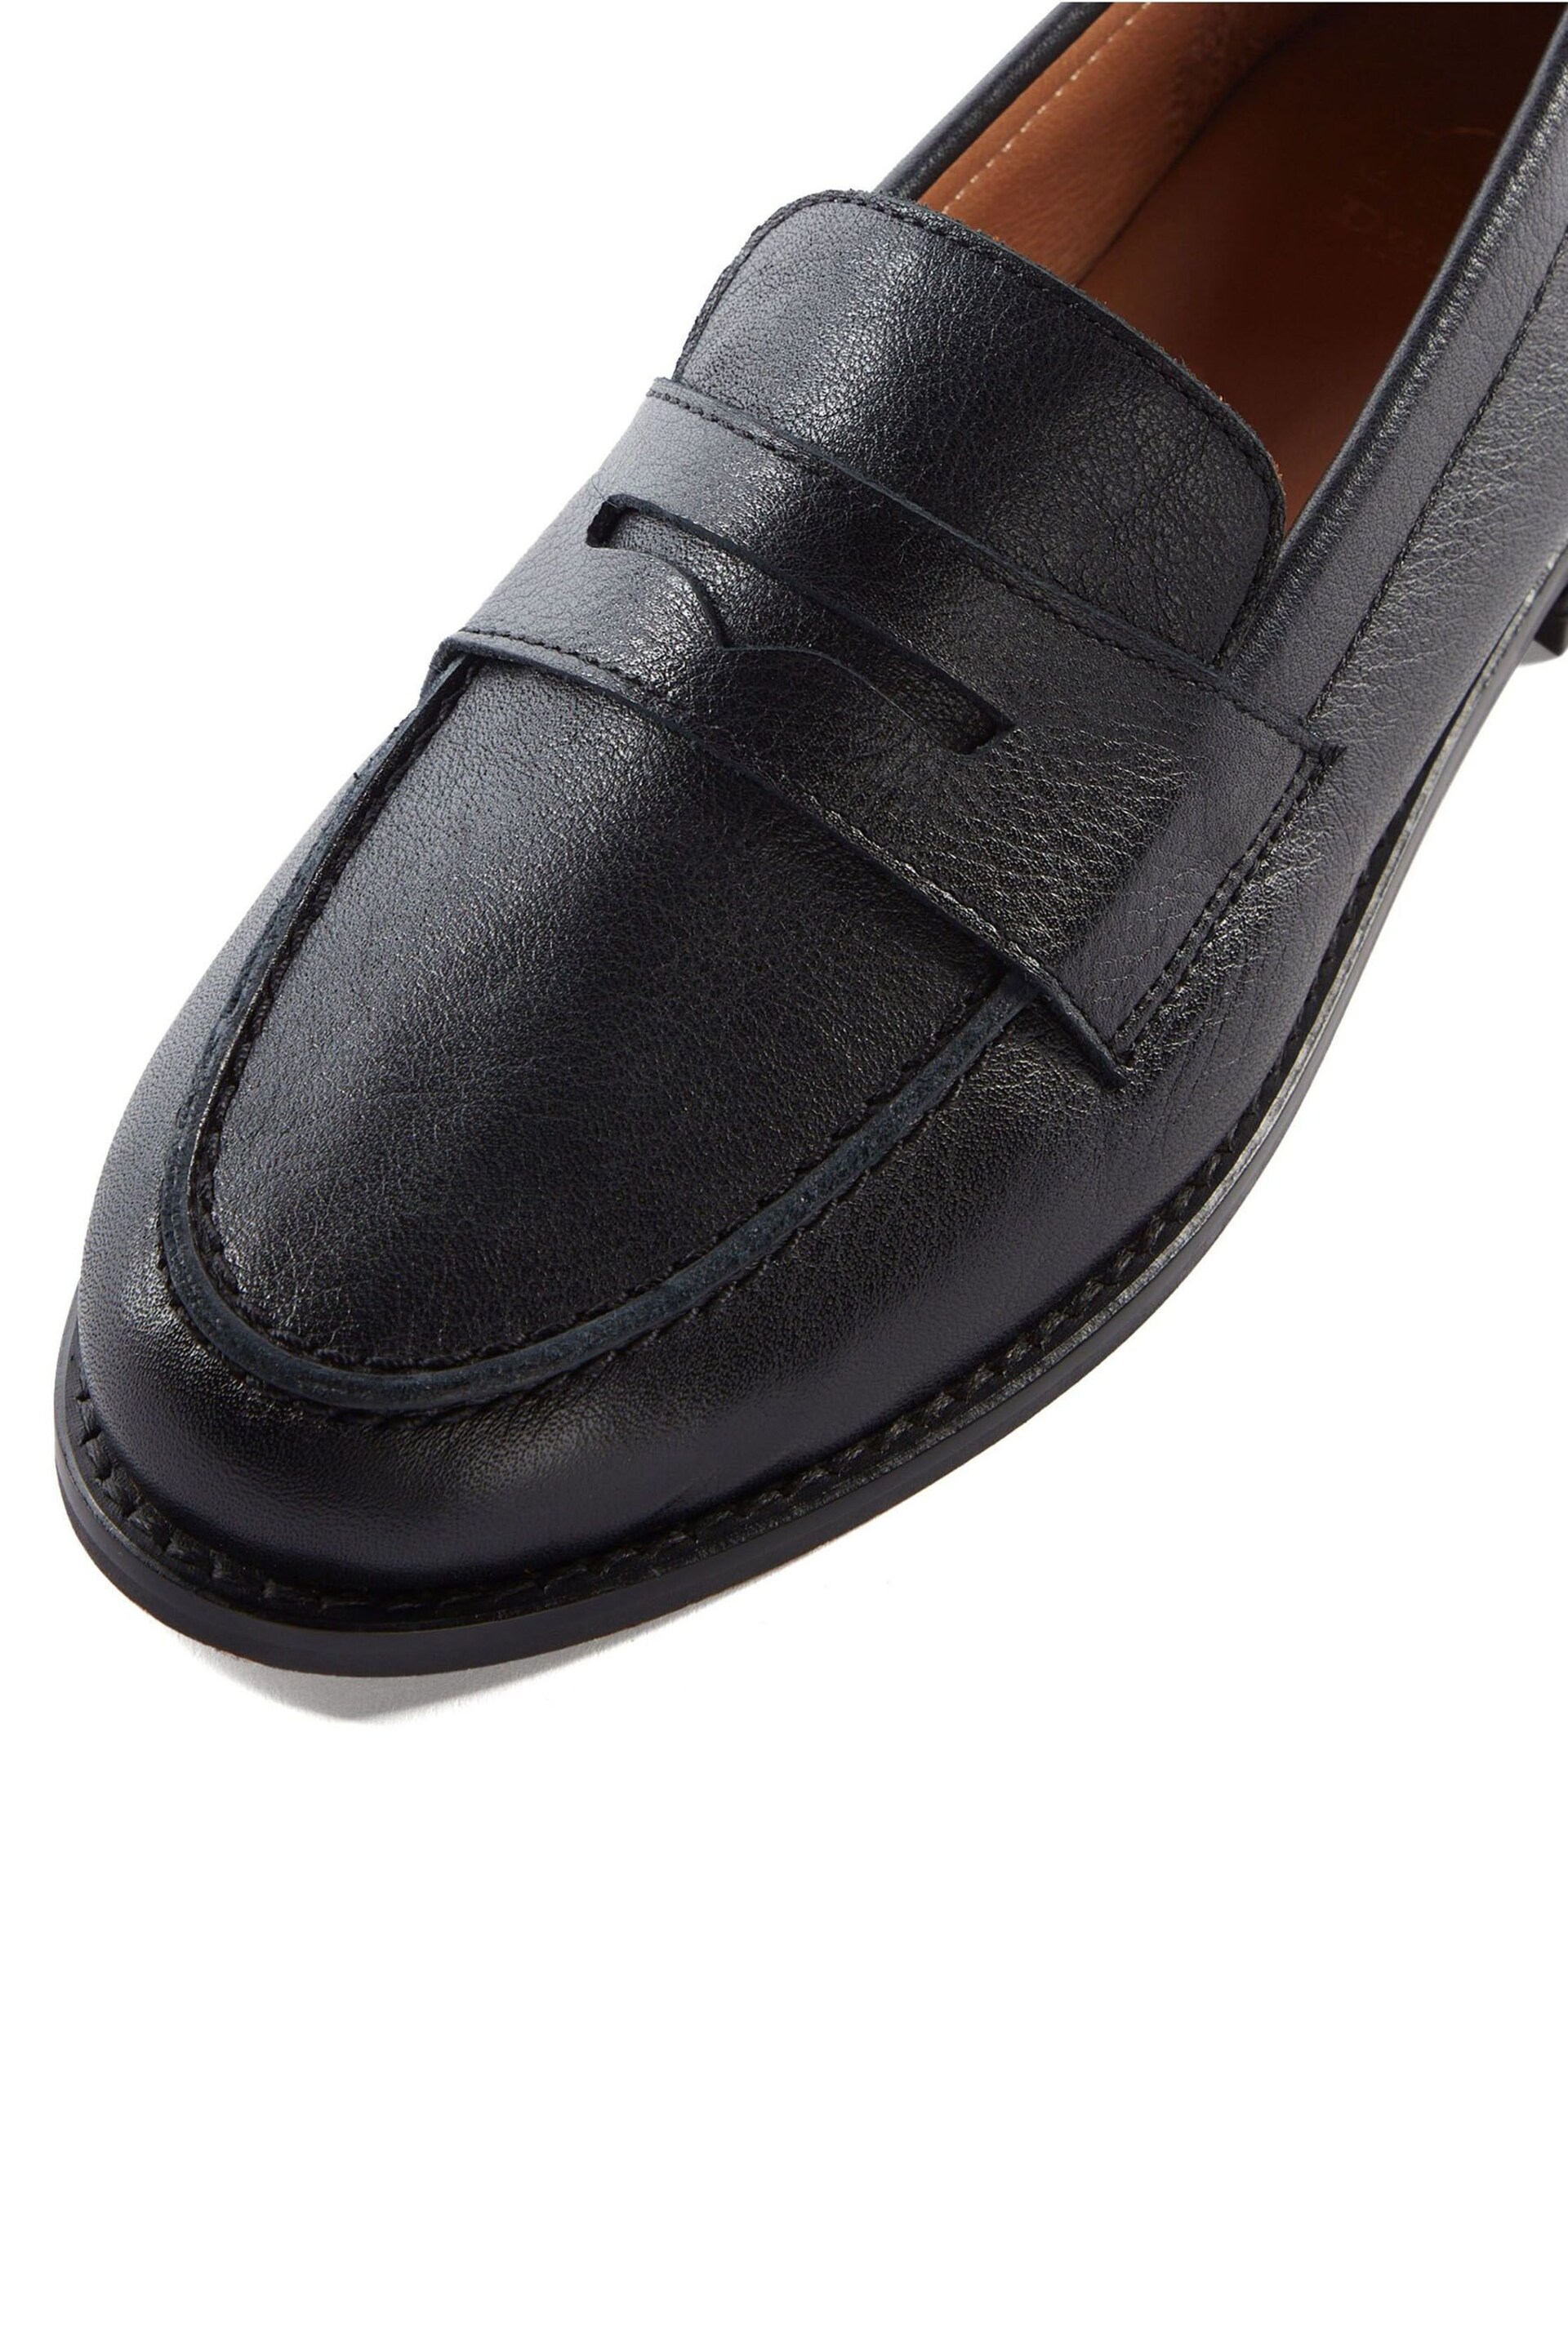 Dune London Black Ginelli Flexi Sole Penny Loafers - Image 5 of 5